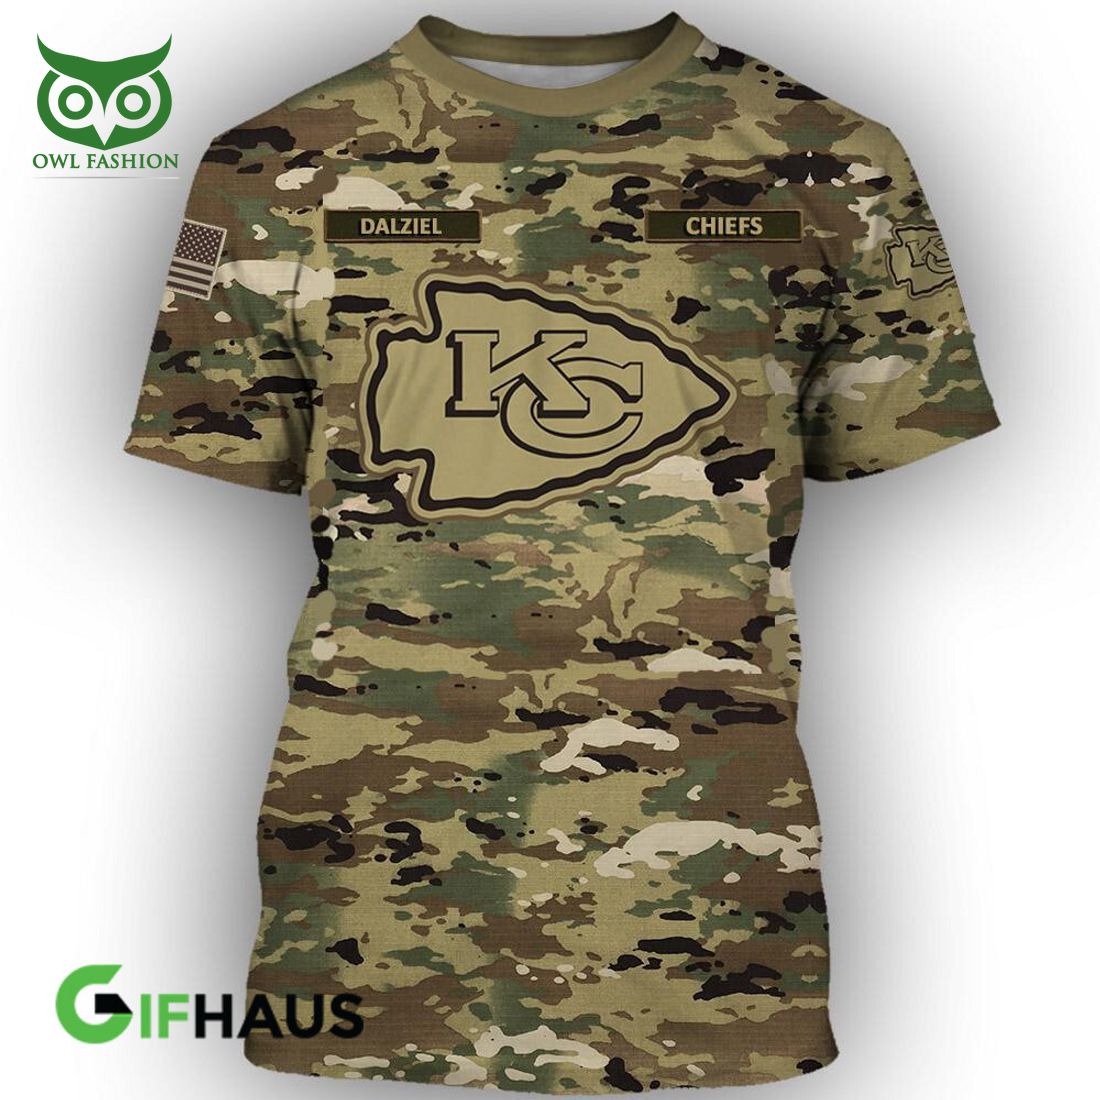 Kansas City Chiefs NFL Special Camo Realtree Hunting Personalized